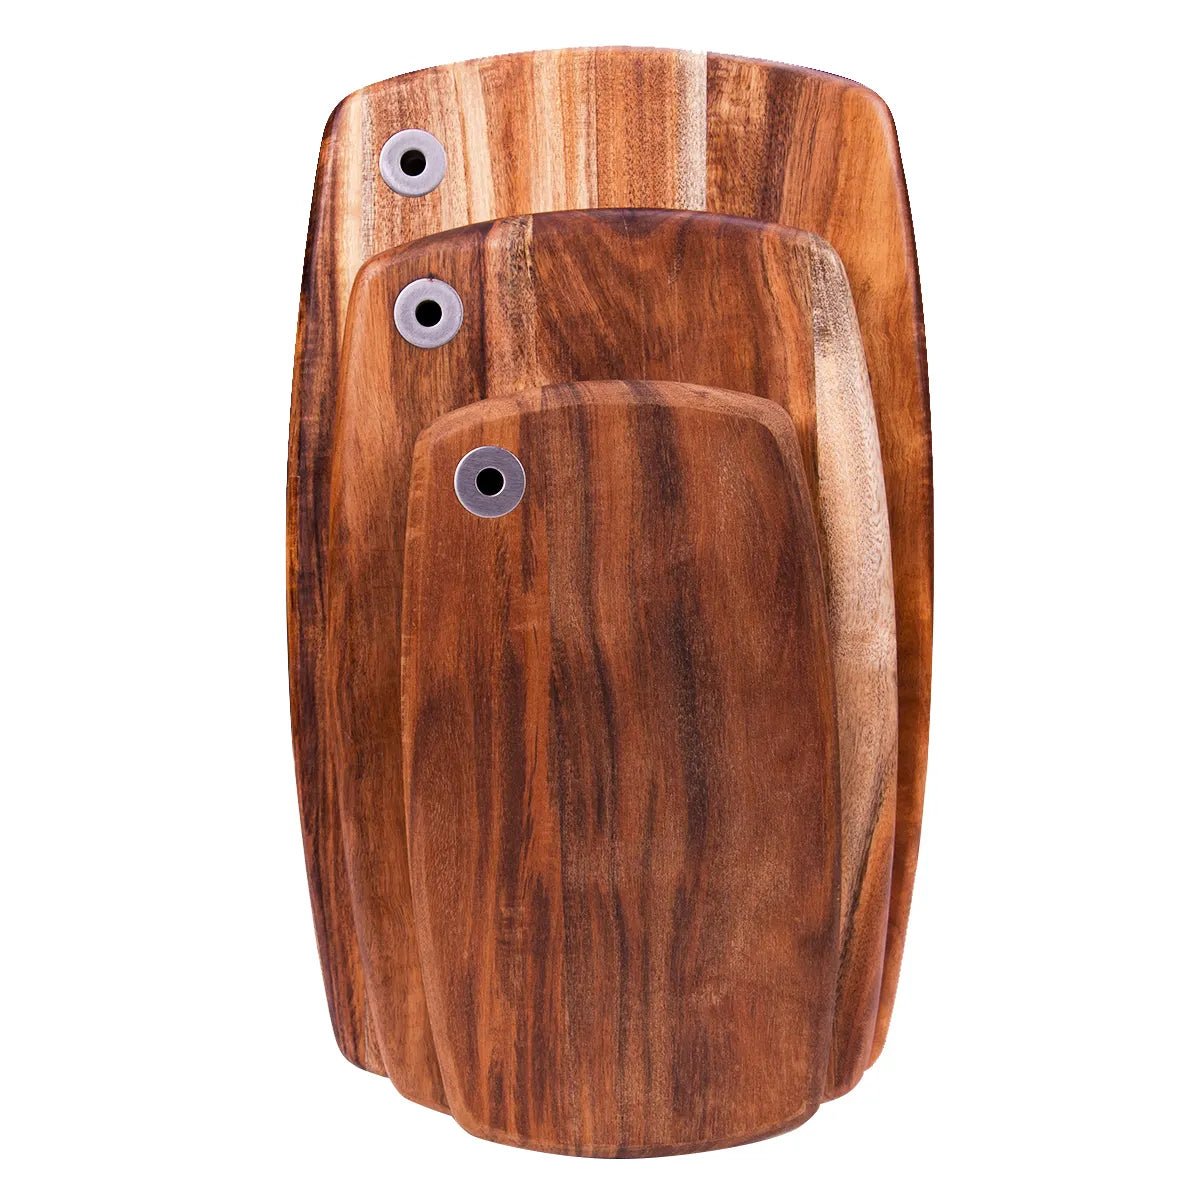 Acacia Wood Charcuterie Cheese Board for Food Meats Bread - Rustic Furniture Outlet